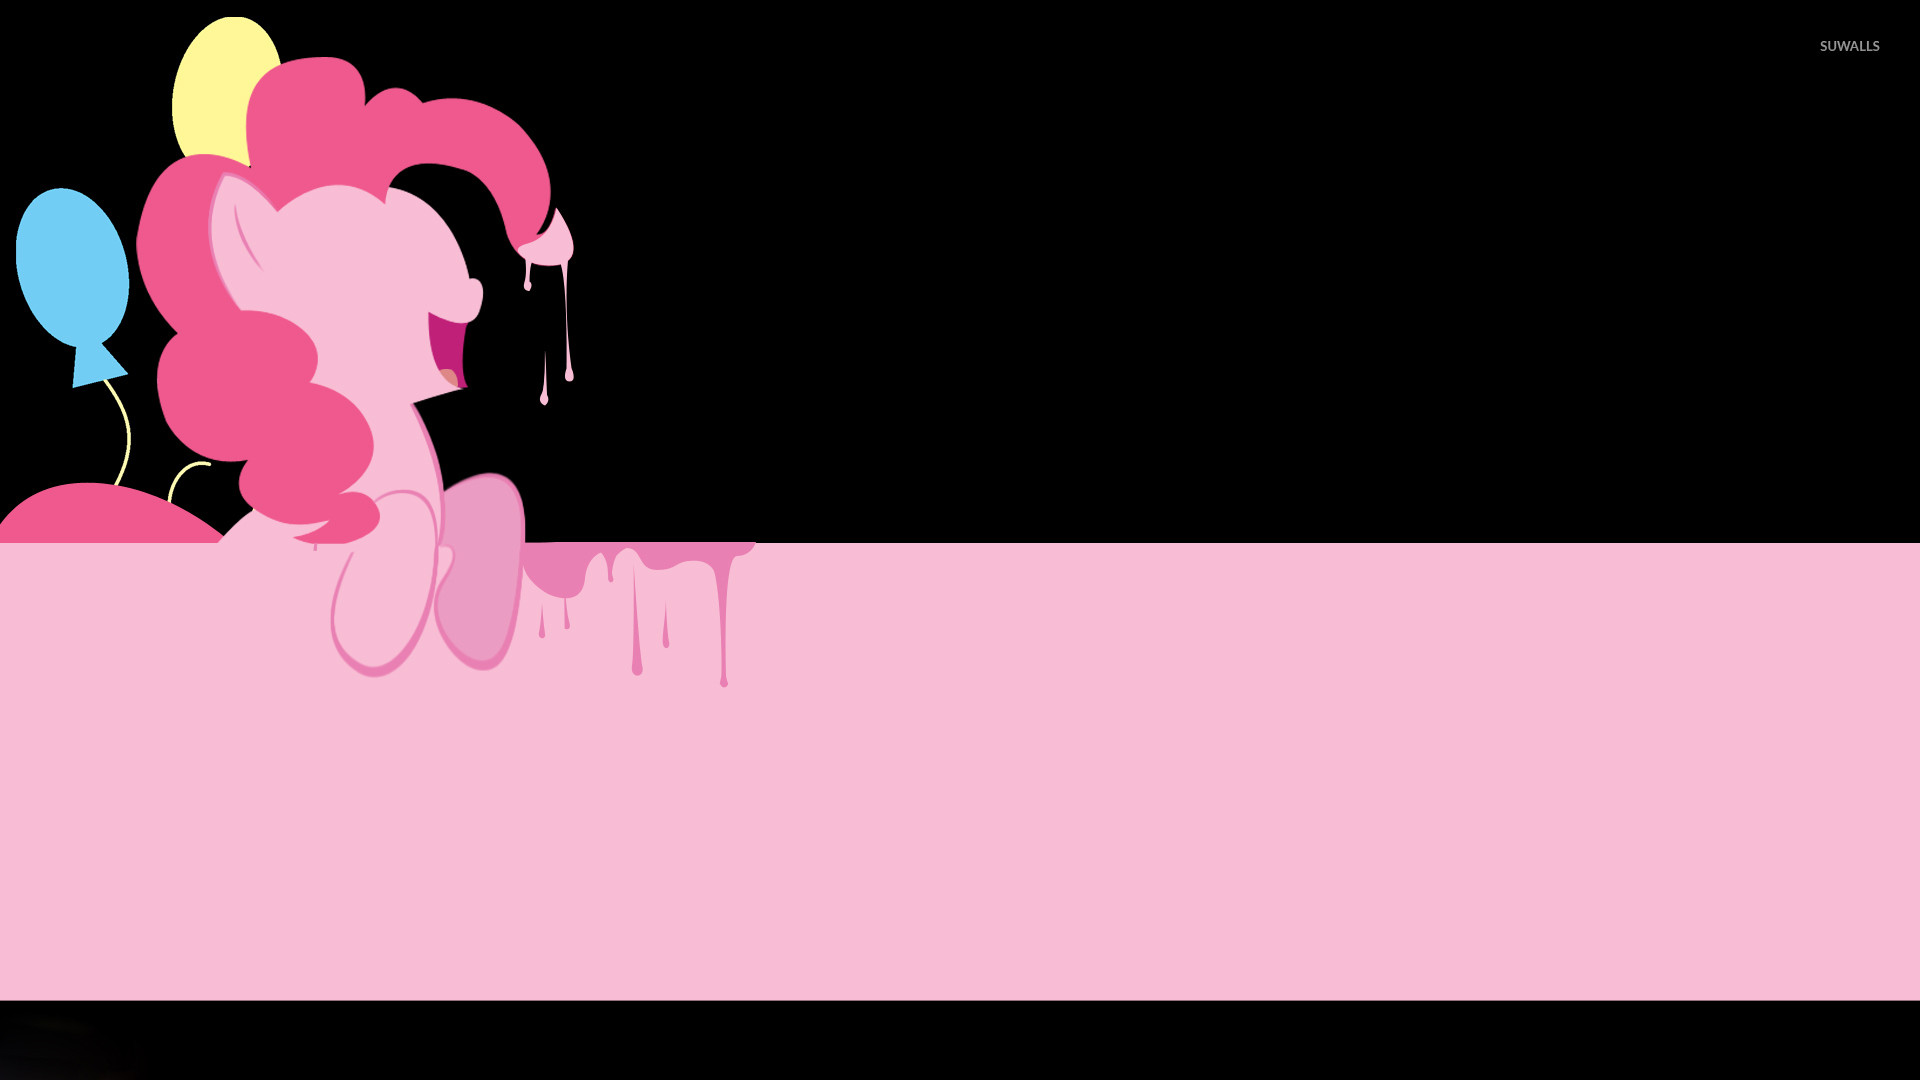 1920x1080 Pink paint dripping from Pinkie Pie's hair - My Little Pony wallpaper   jpg